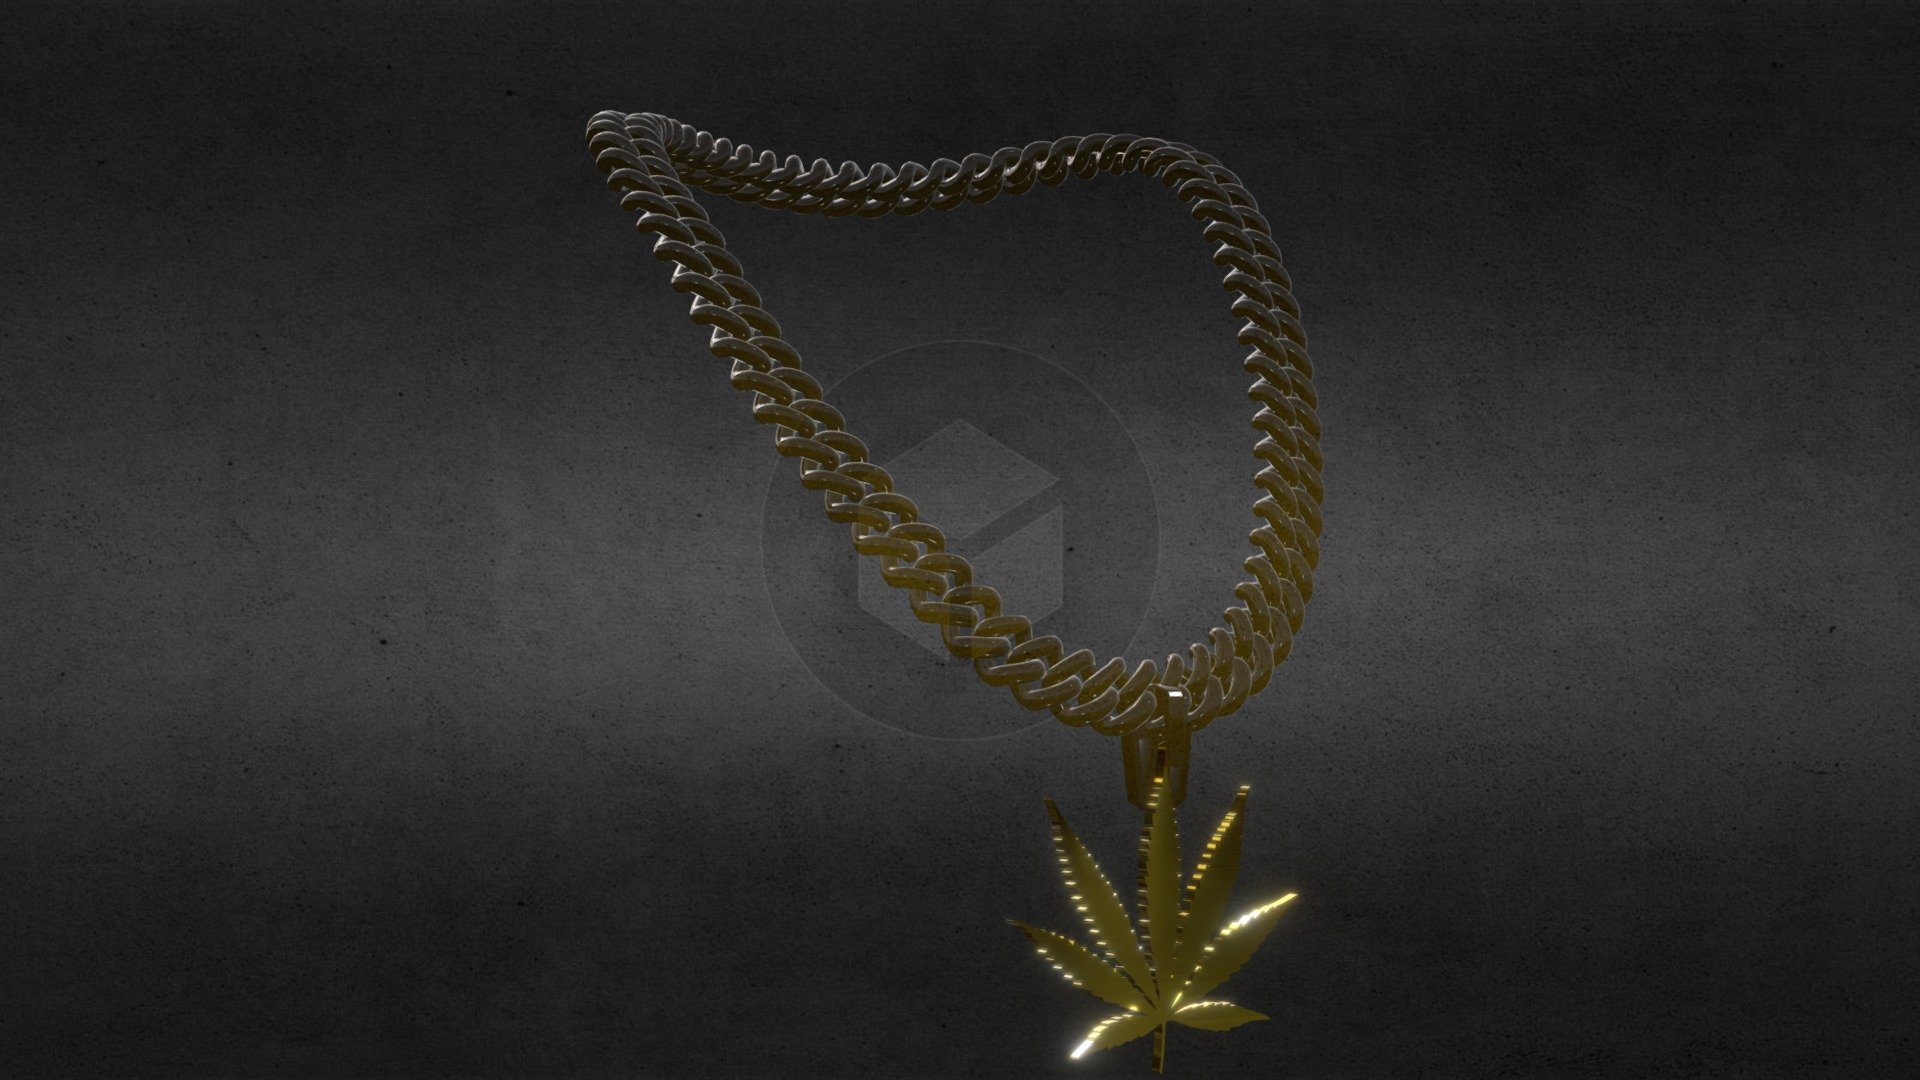 weed cuban chain gangsta 

want best result in blender just make it full metallic and roughness to 0 - cuban weed chain - Download Free 3D model by xerces (@nafaysoomro88) 3d model